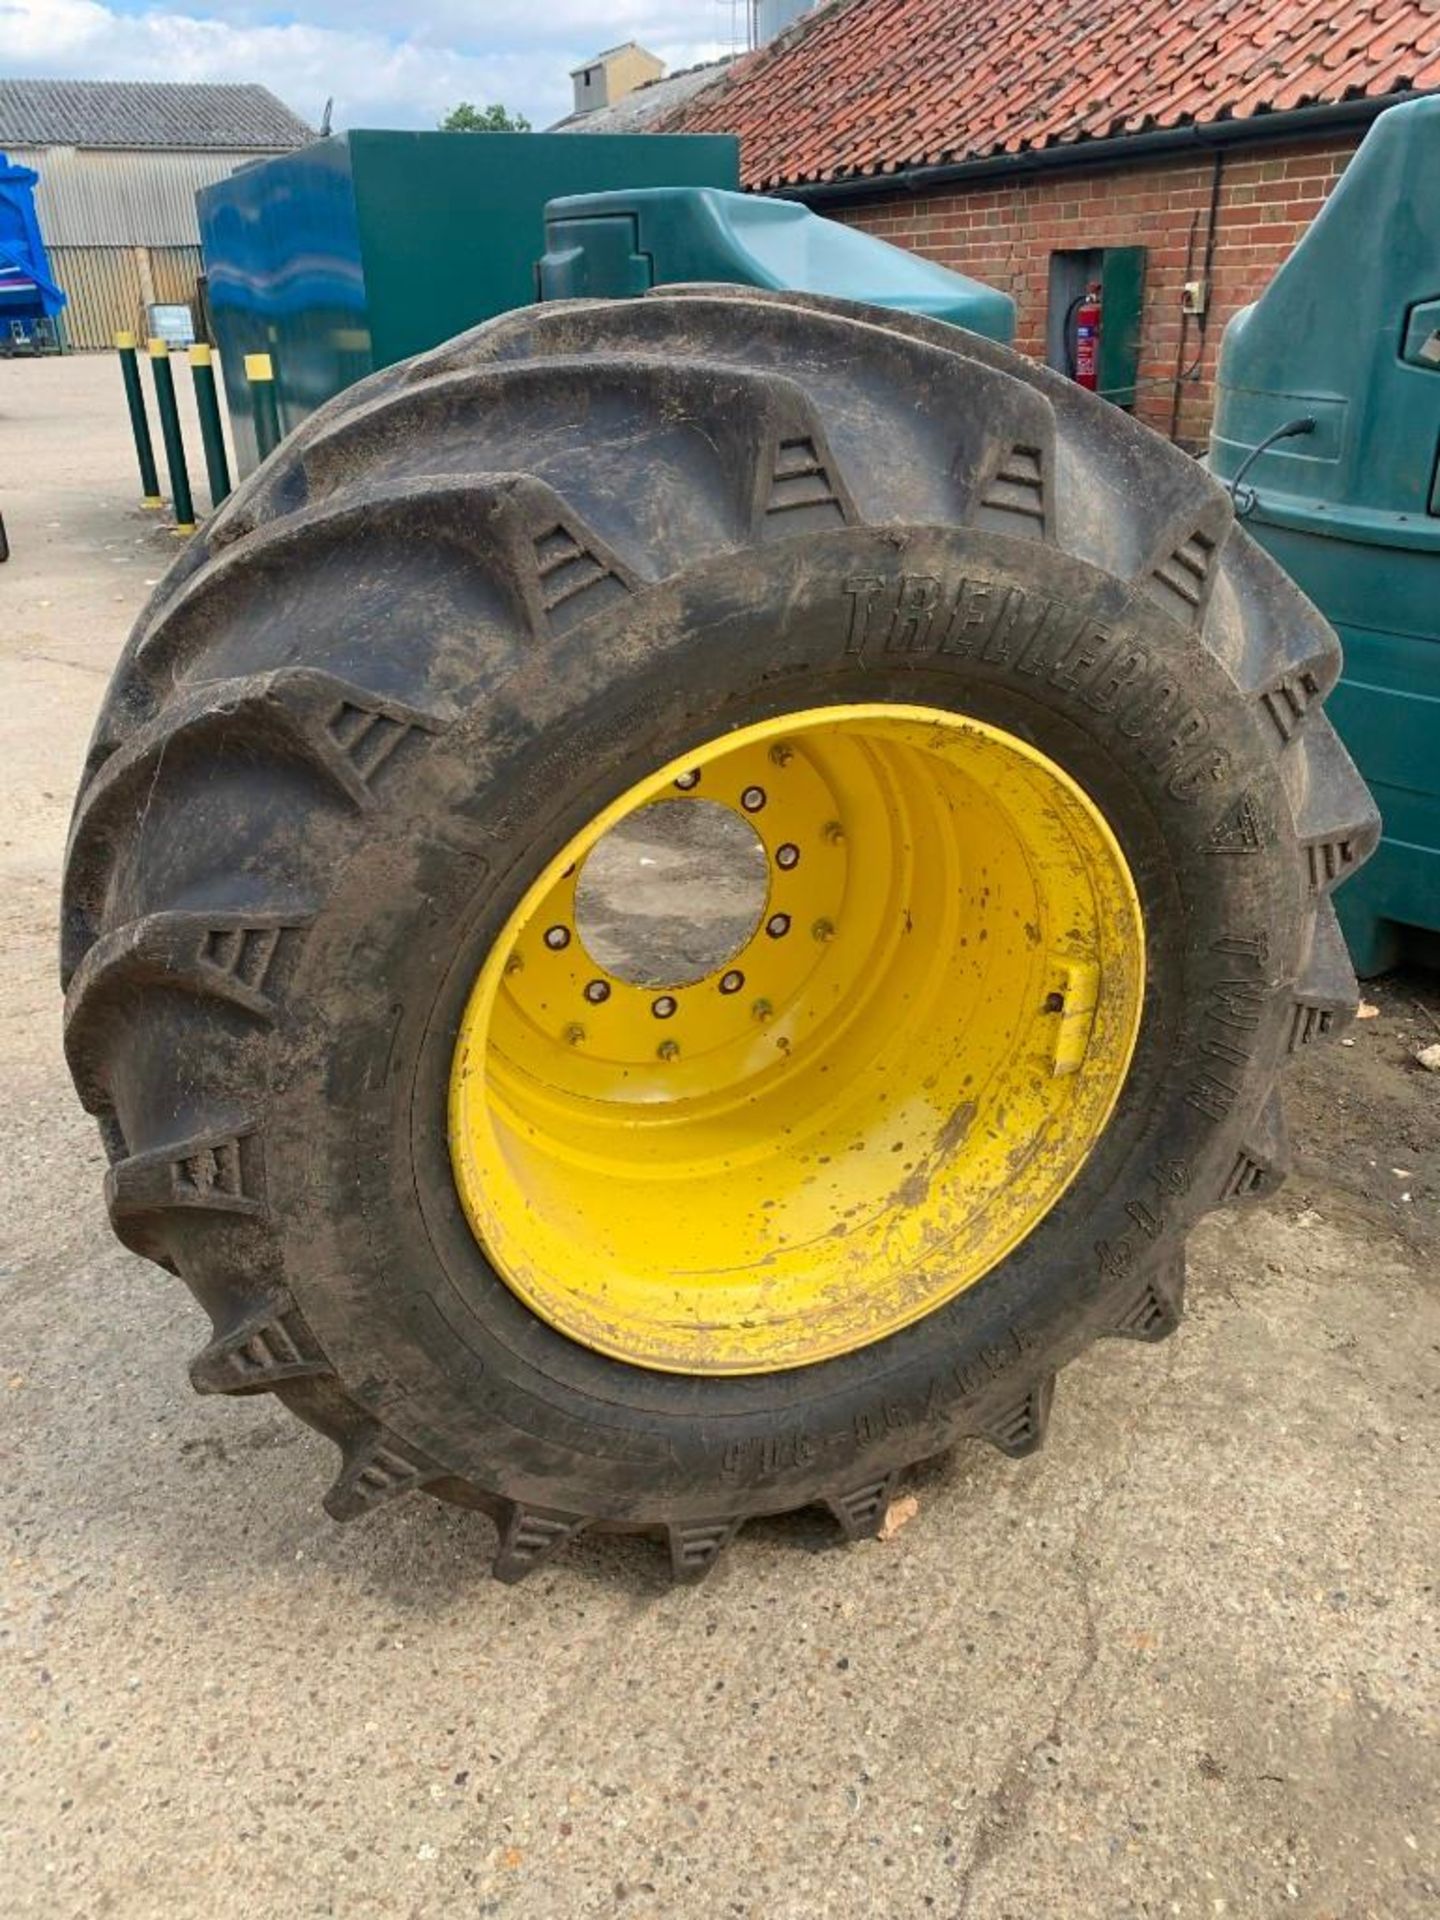 Trelleborg Tyres and Rims, Rear Tyres: 850/55 R42, Front Tyres: 750/50 R30.5 - Image 3 of 6